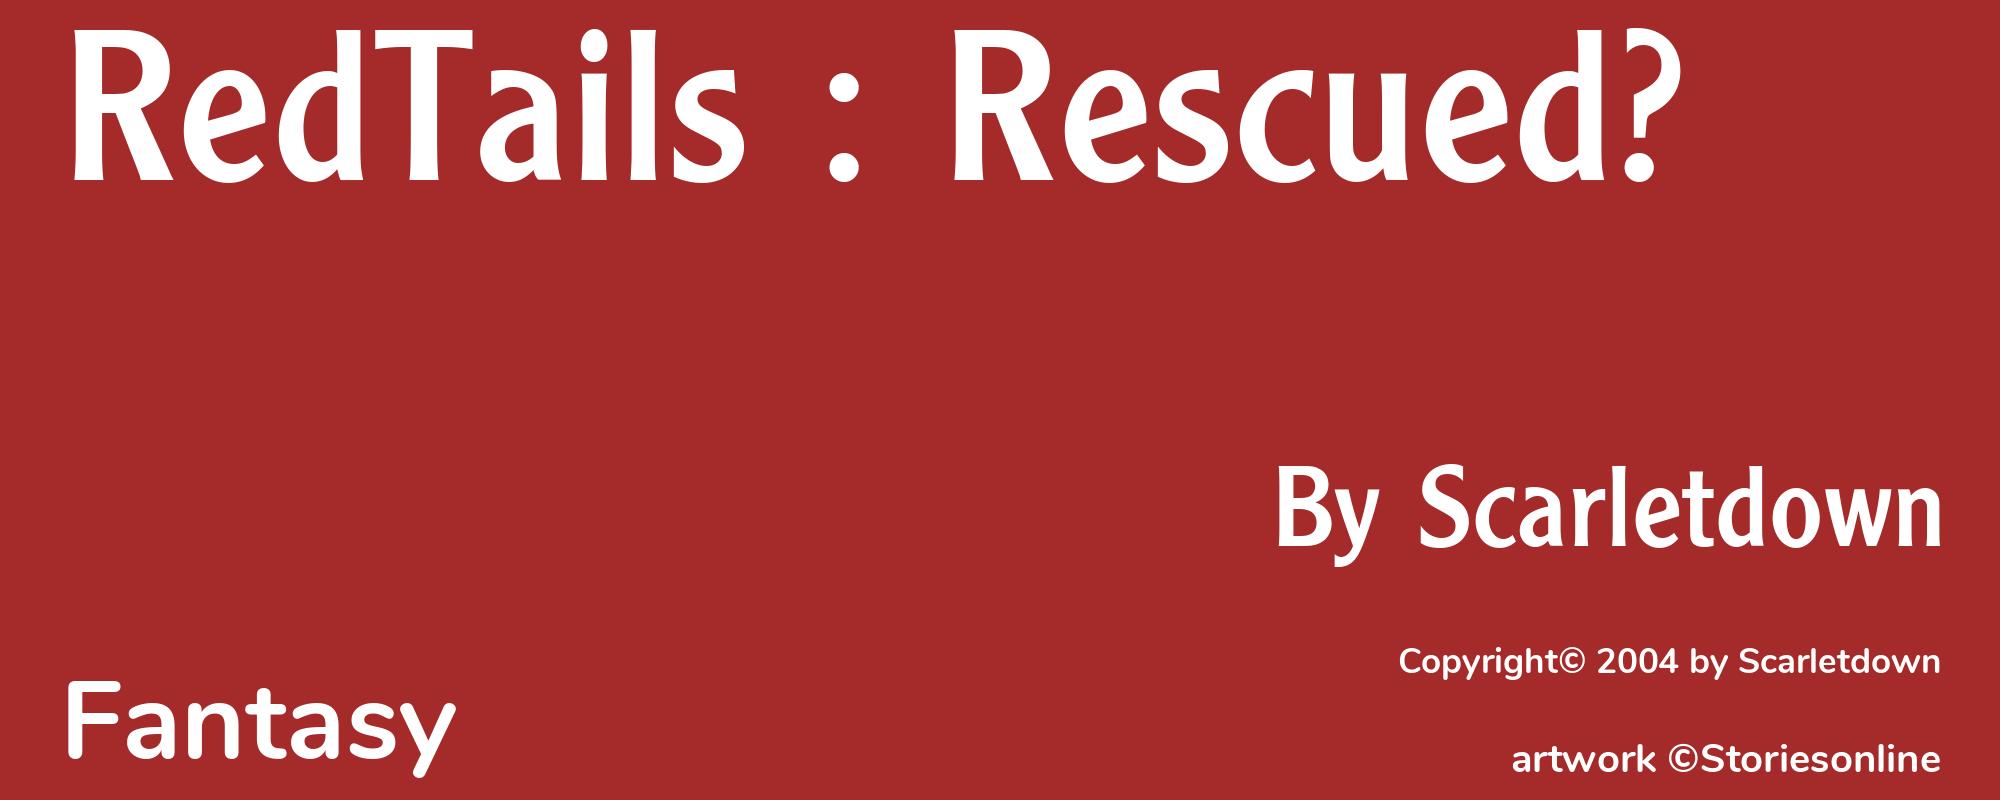 RedTails : Rescued? - Cover